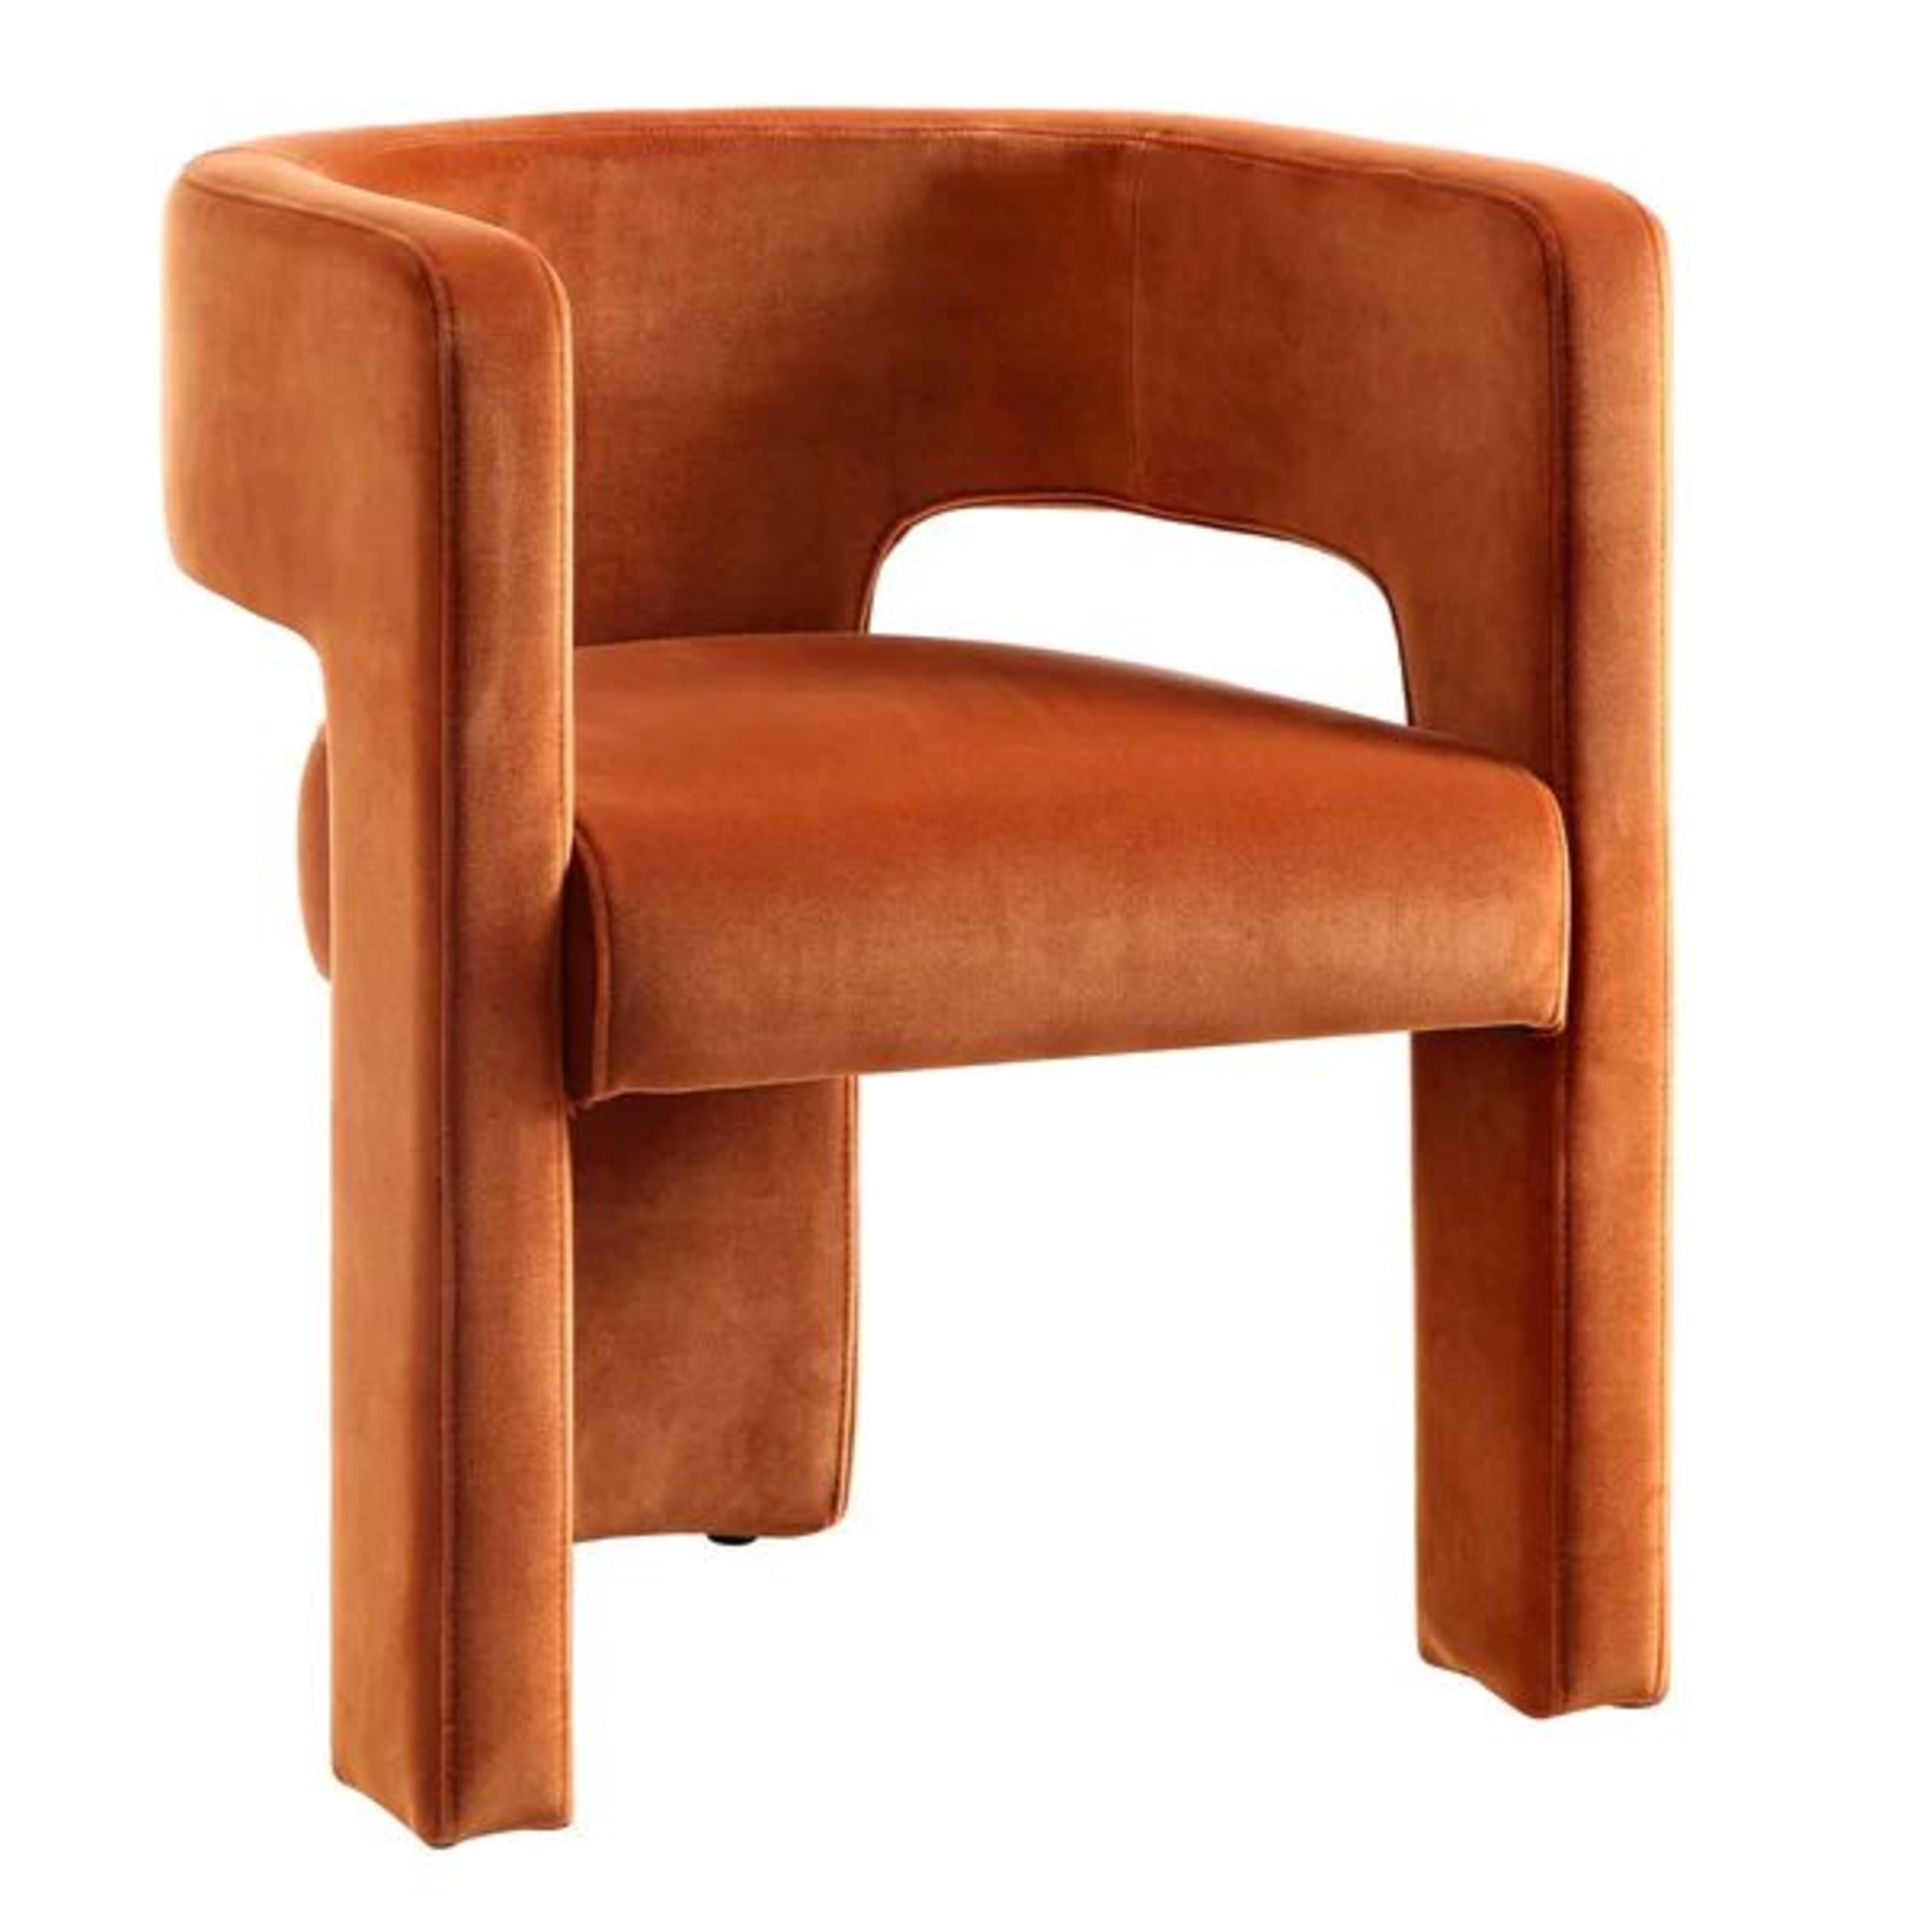 Greenwich Rust Velvet Dining Chair. - ER30. RRP £219.99. Our beautiful Greenwich chair features - Image 2 of 2